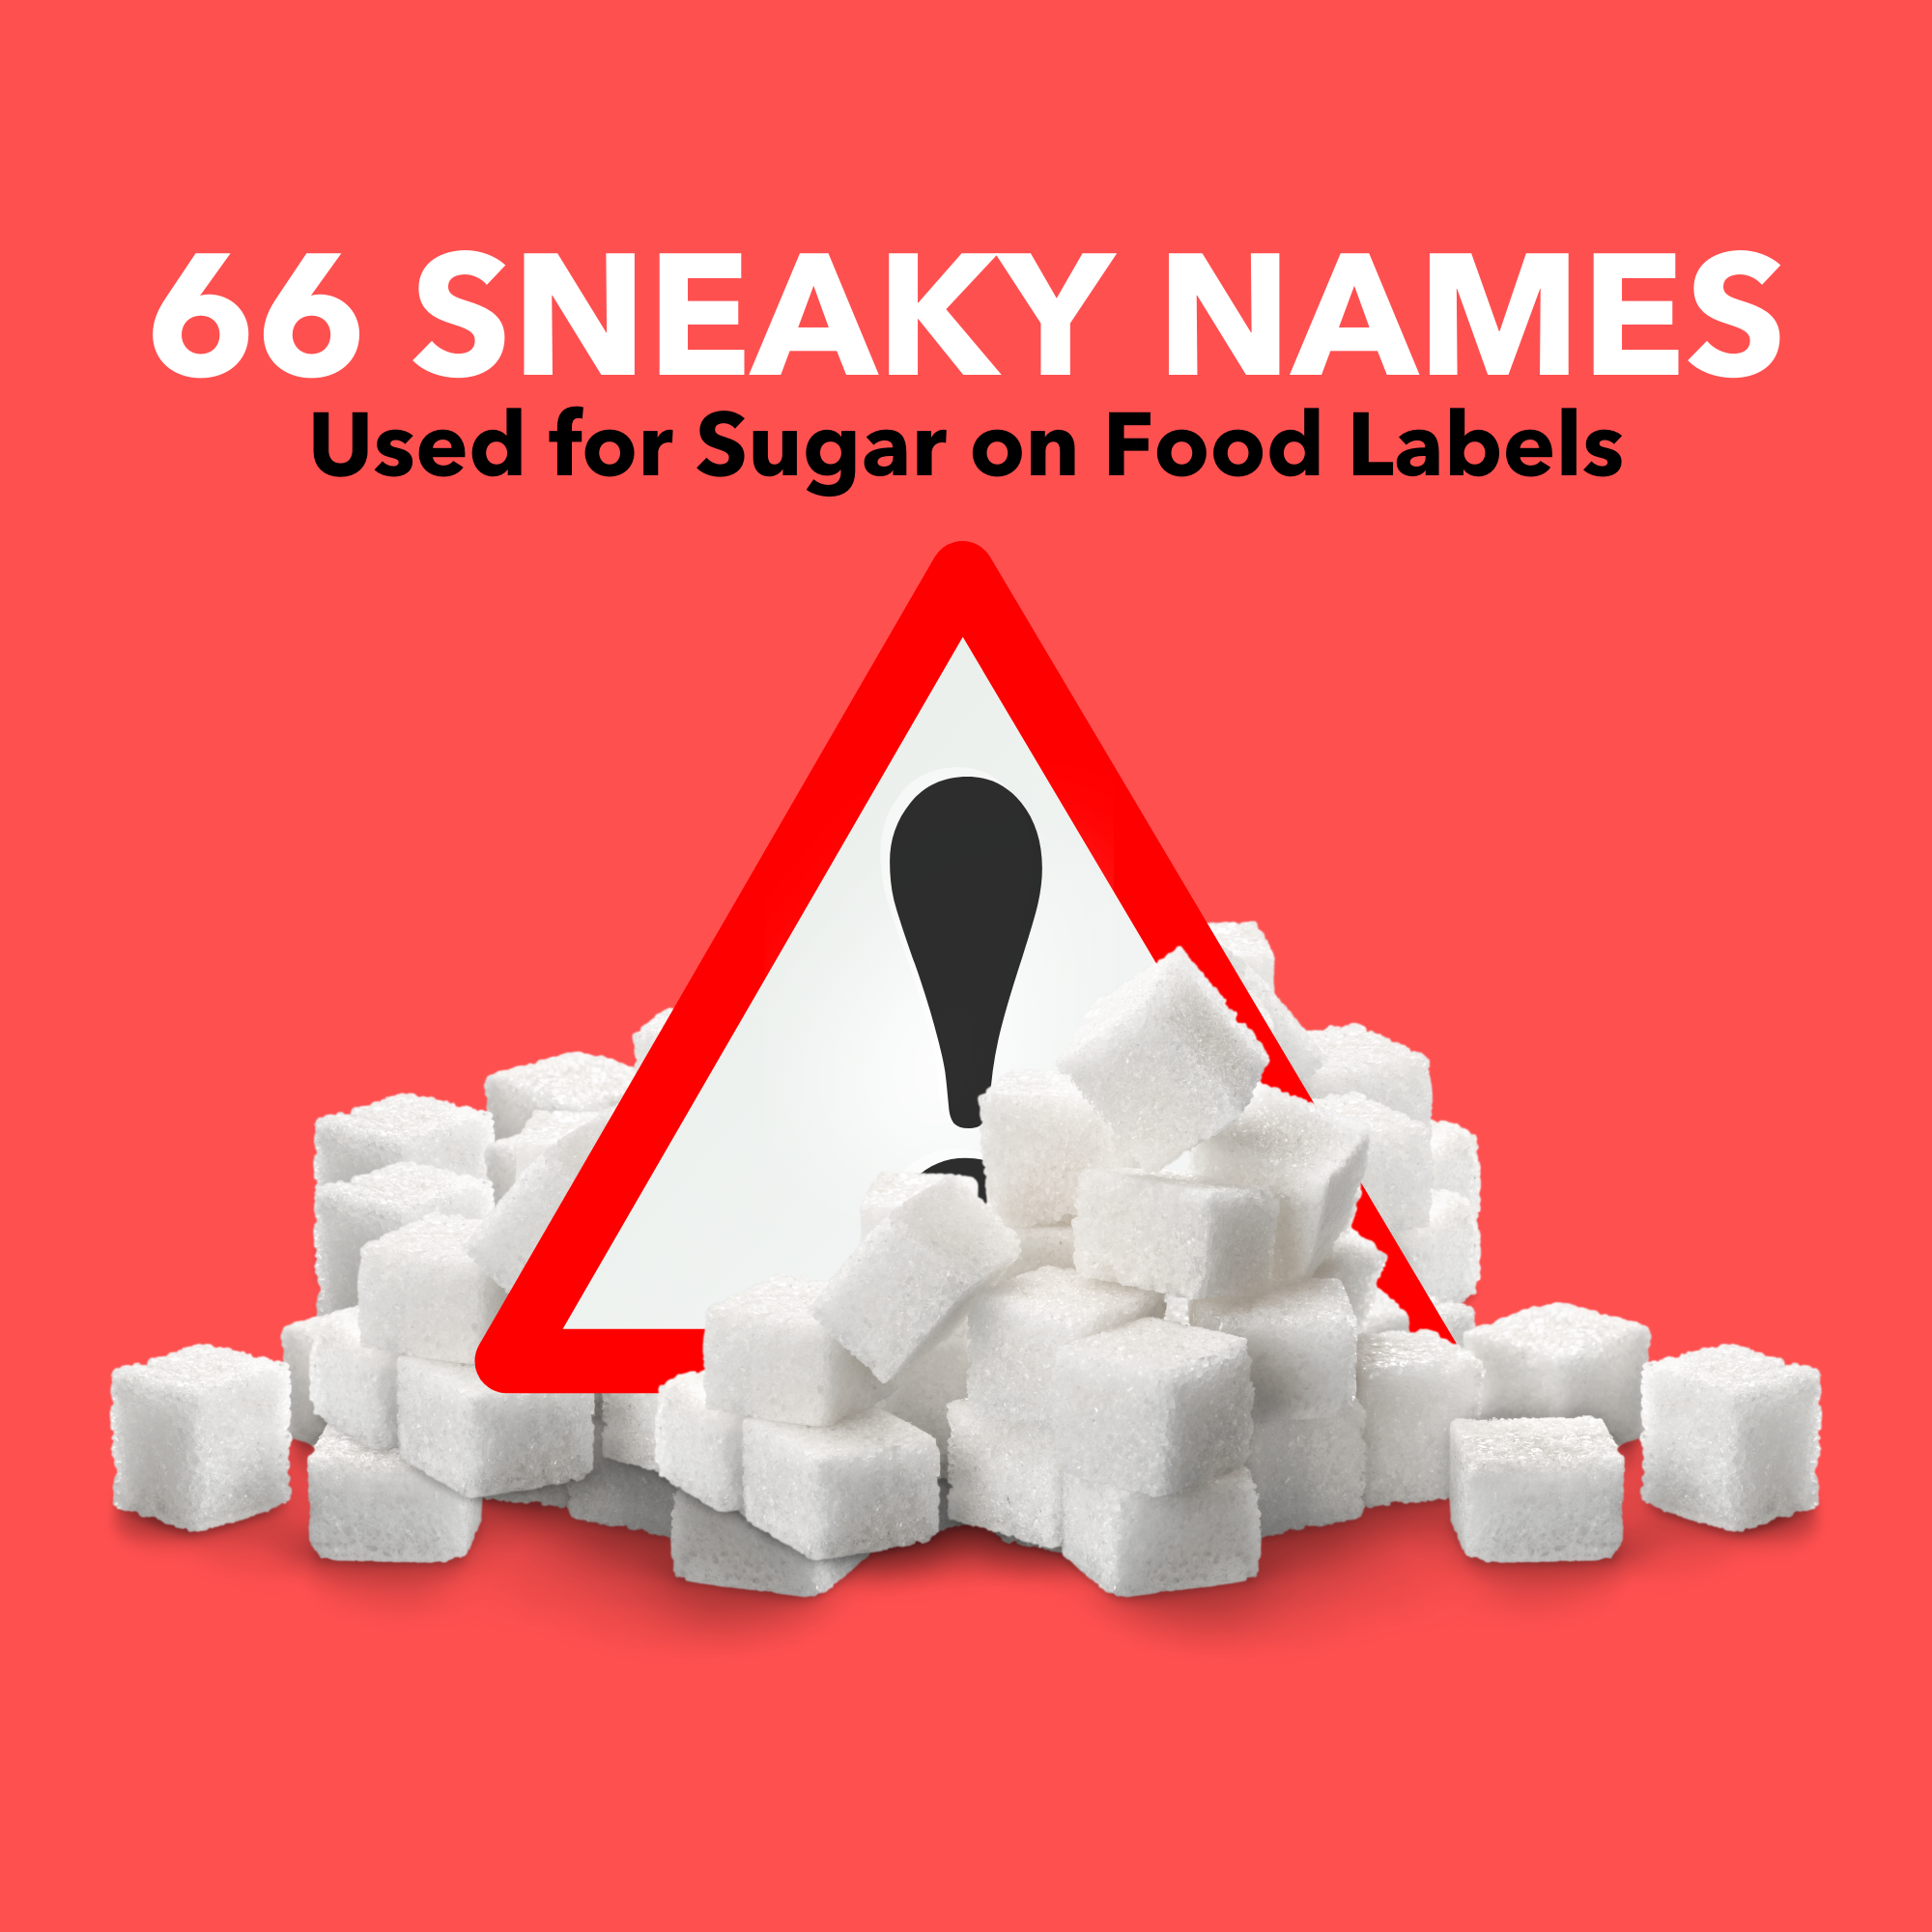 66 Sneaky Names Used for Sugar on Food Labels